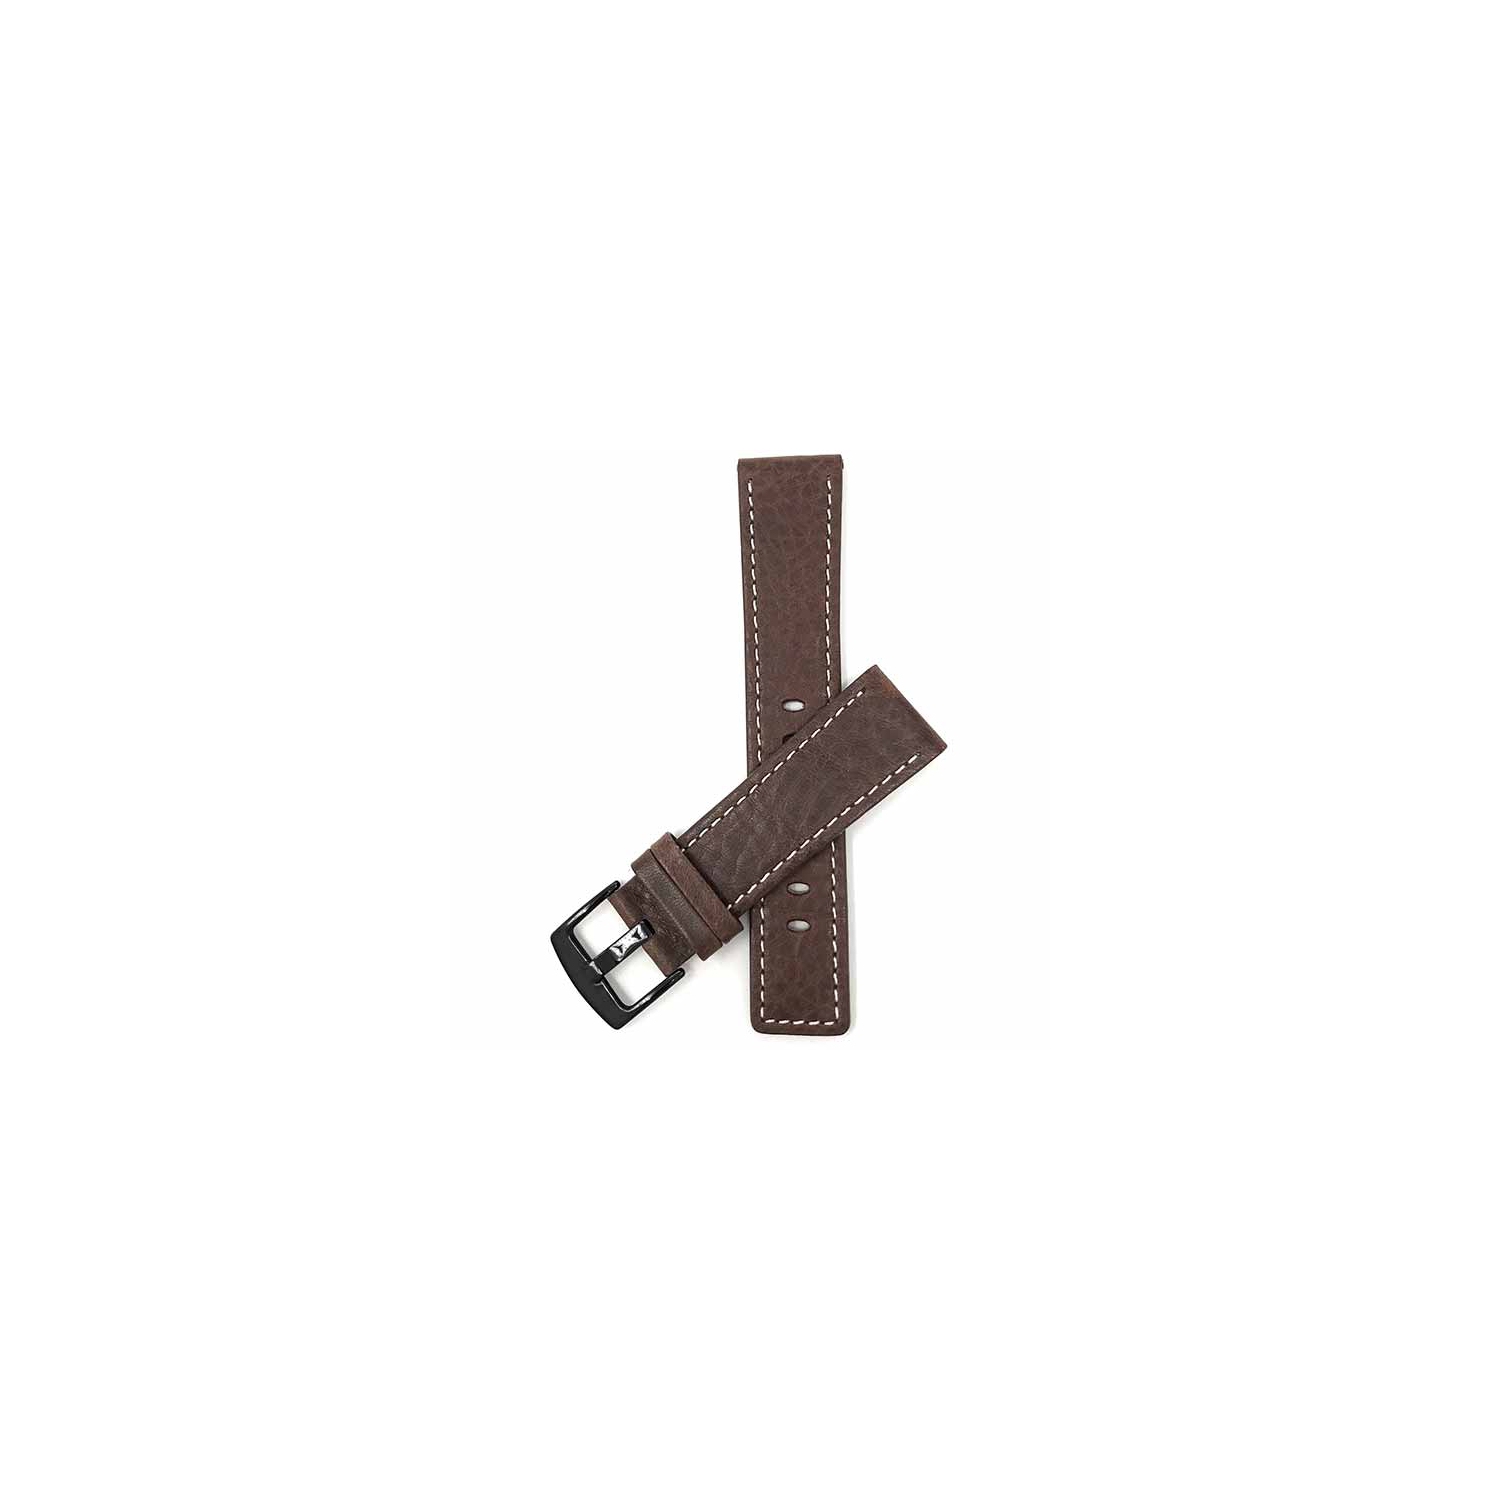 Bandini Square Tip Leather Smartwatch Strap, White Stitch For Michael Kors Bradshaw - 22mm, Brown / Black Buckle